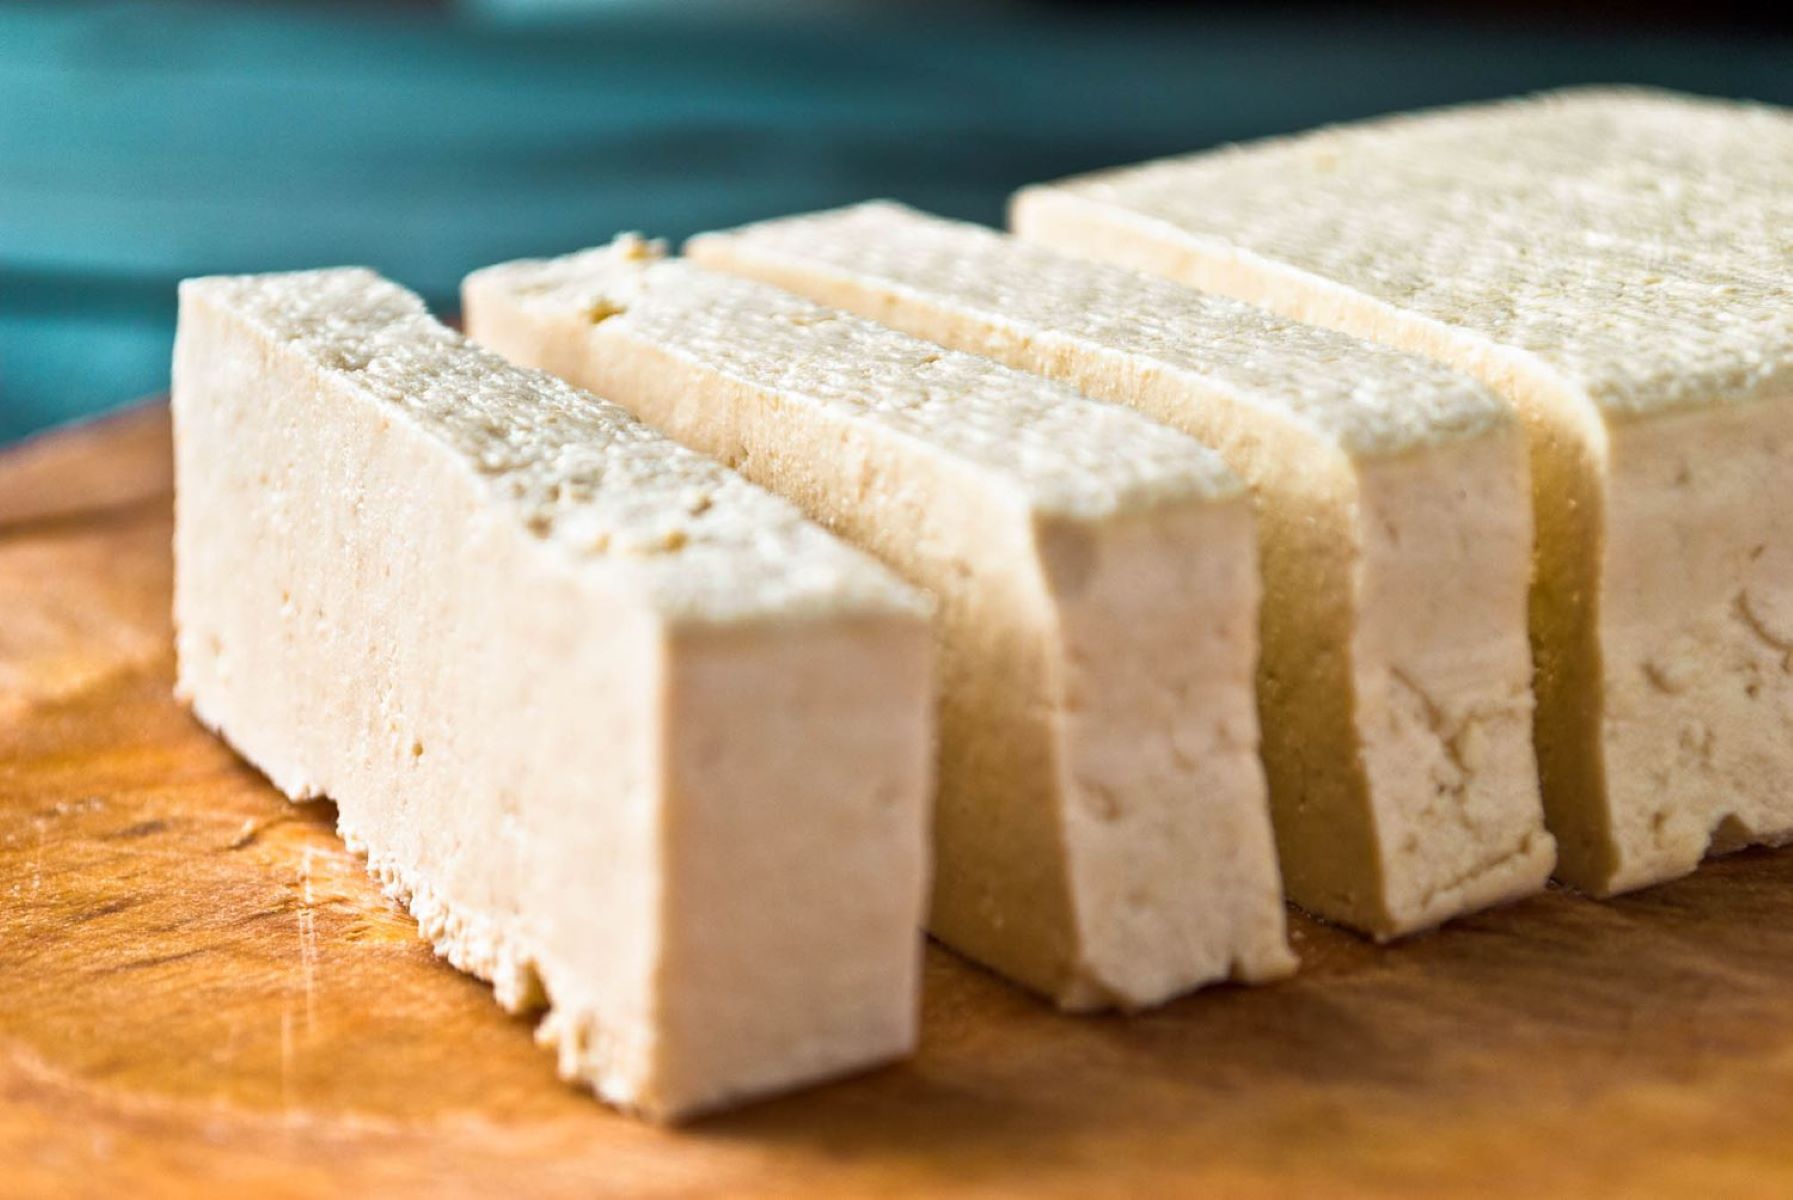 Expired Tofu: Is It Still Safe To Eat?